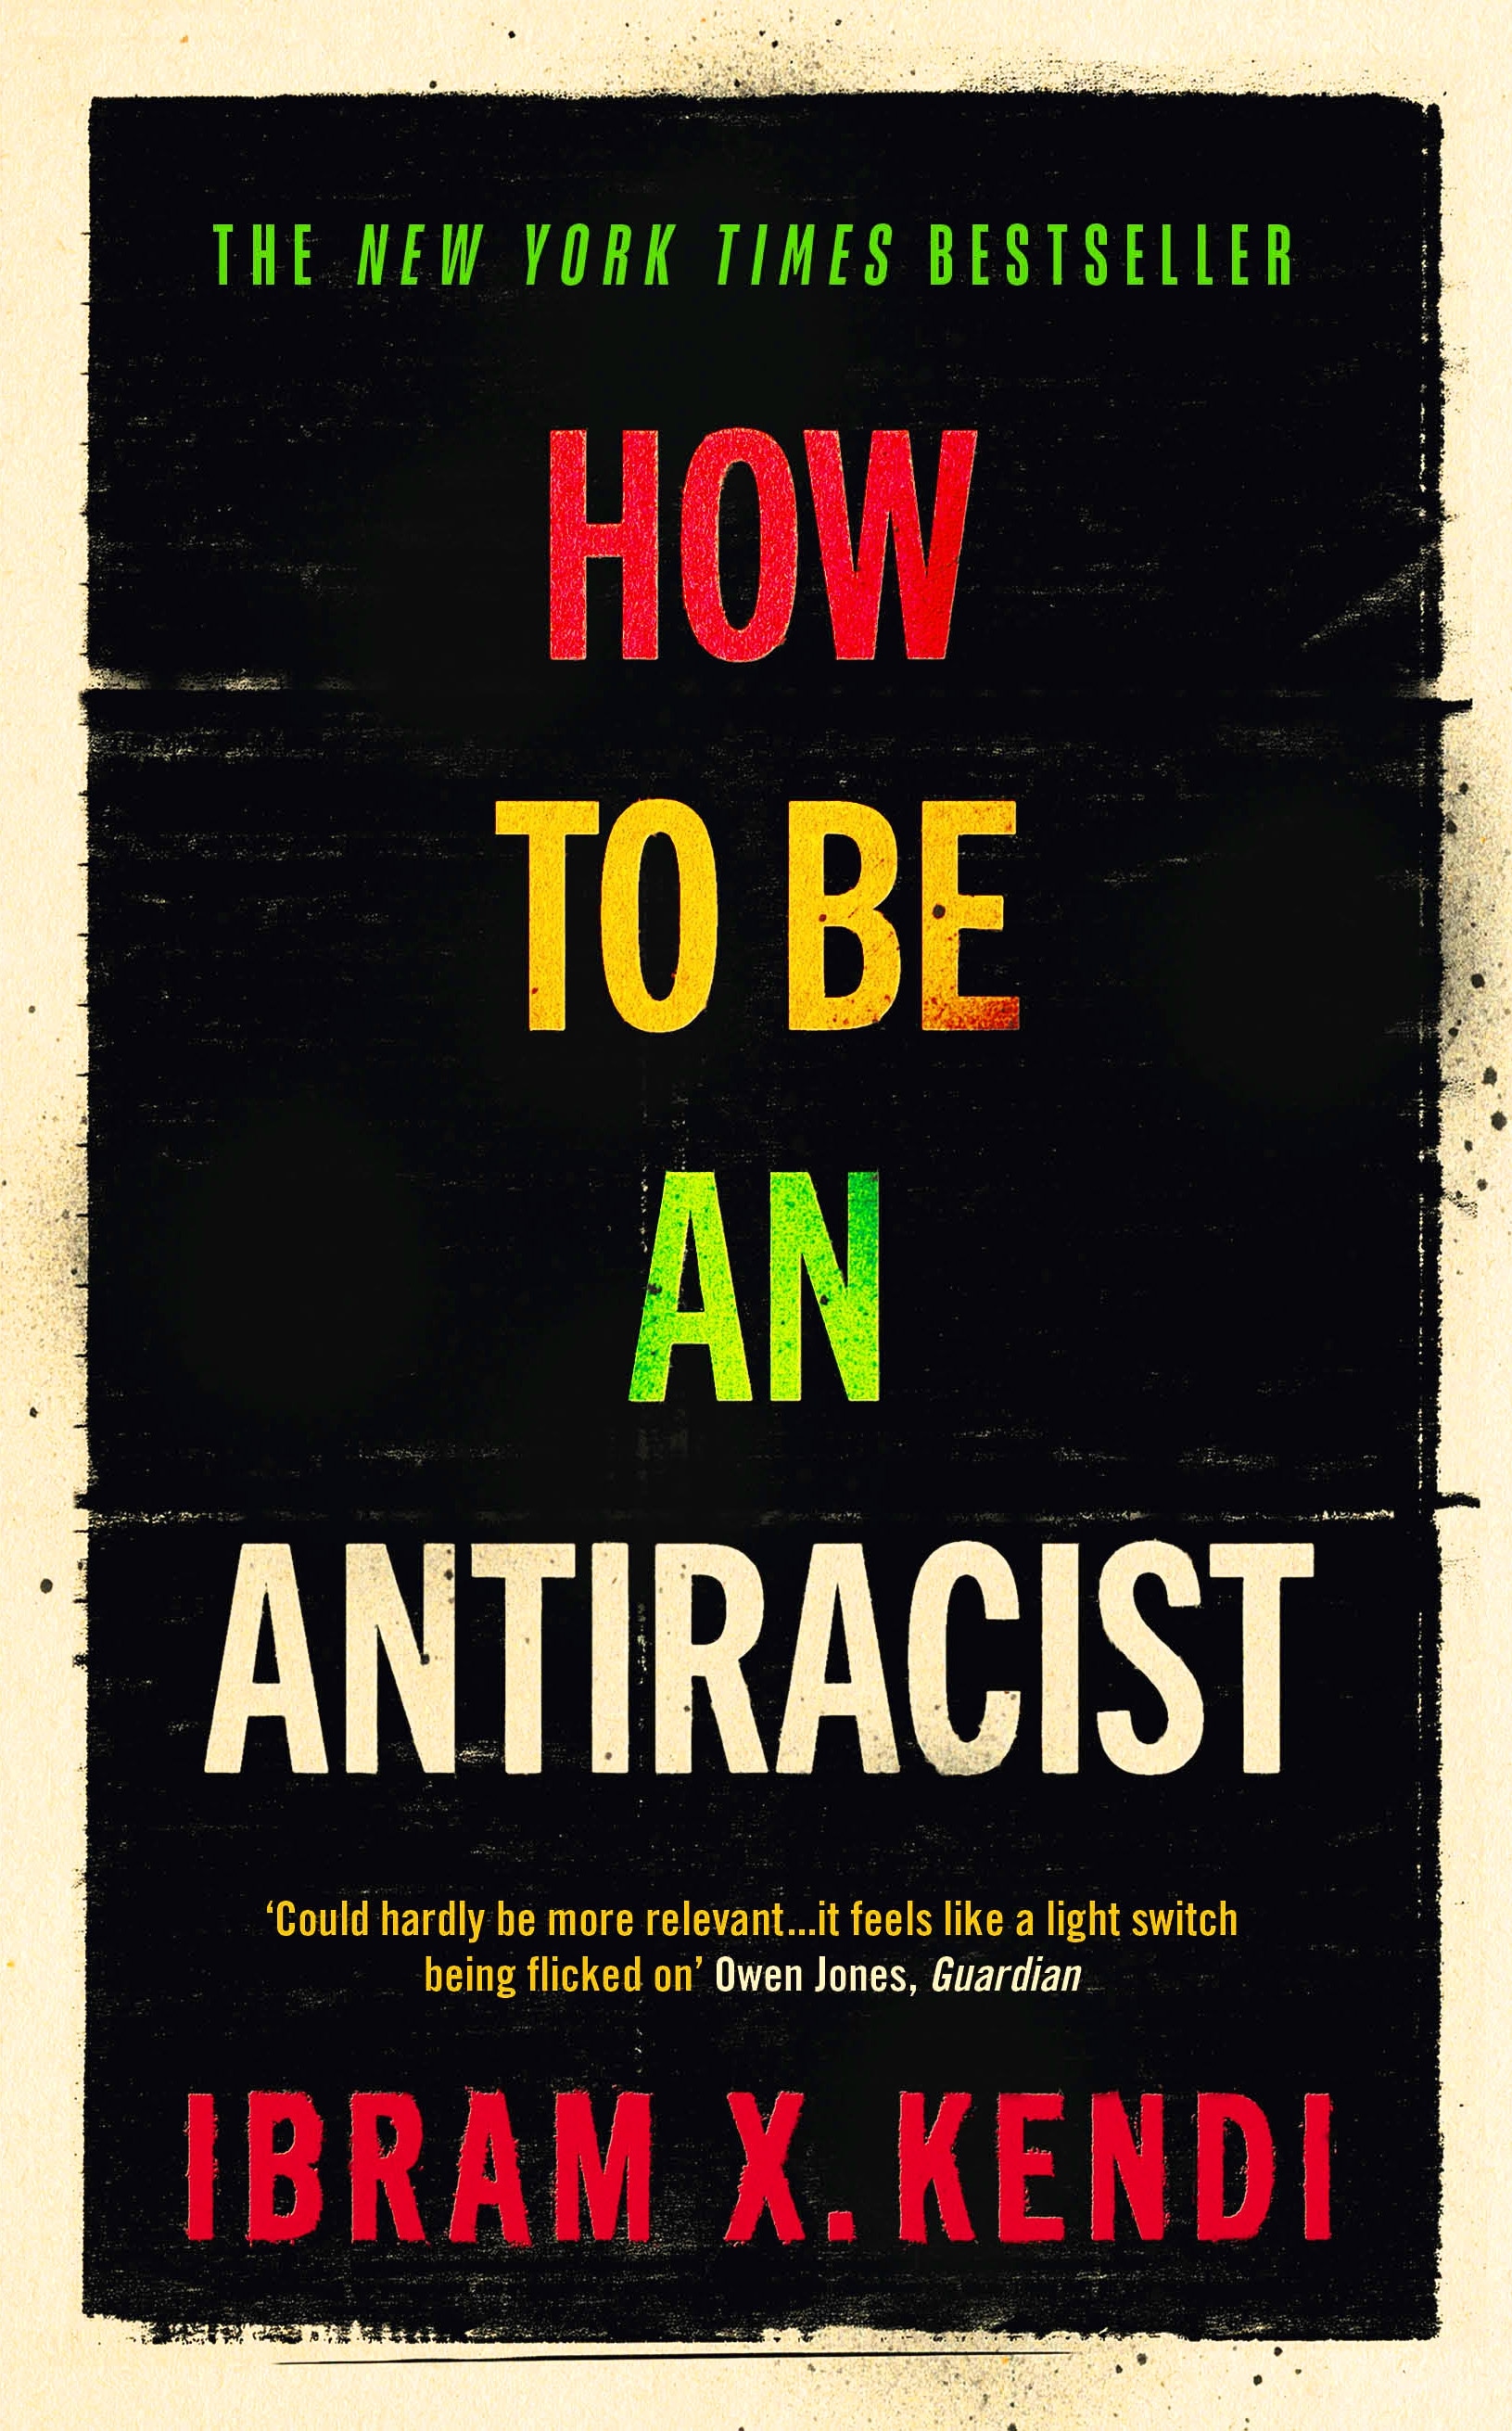 Book “How To Be an Antiracist” by Ibram X. Kendi — August 15, 2019